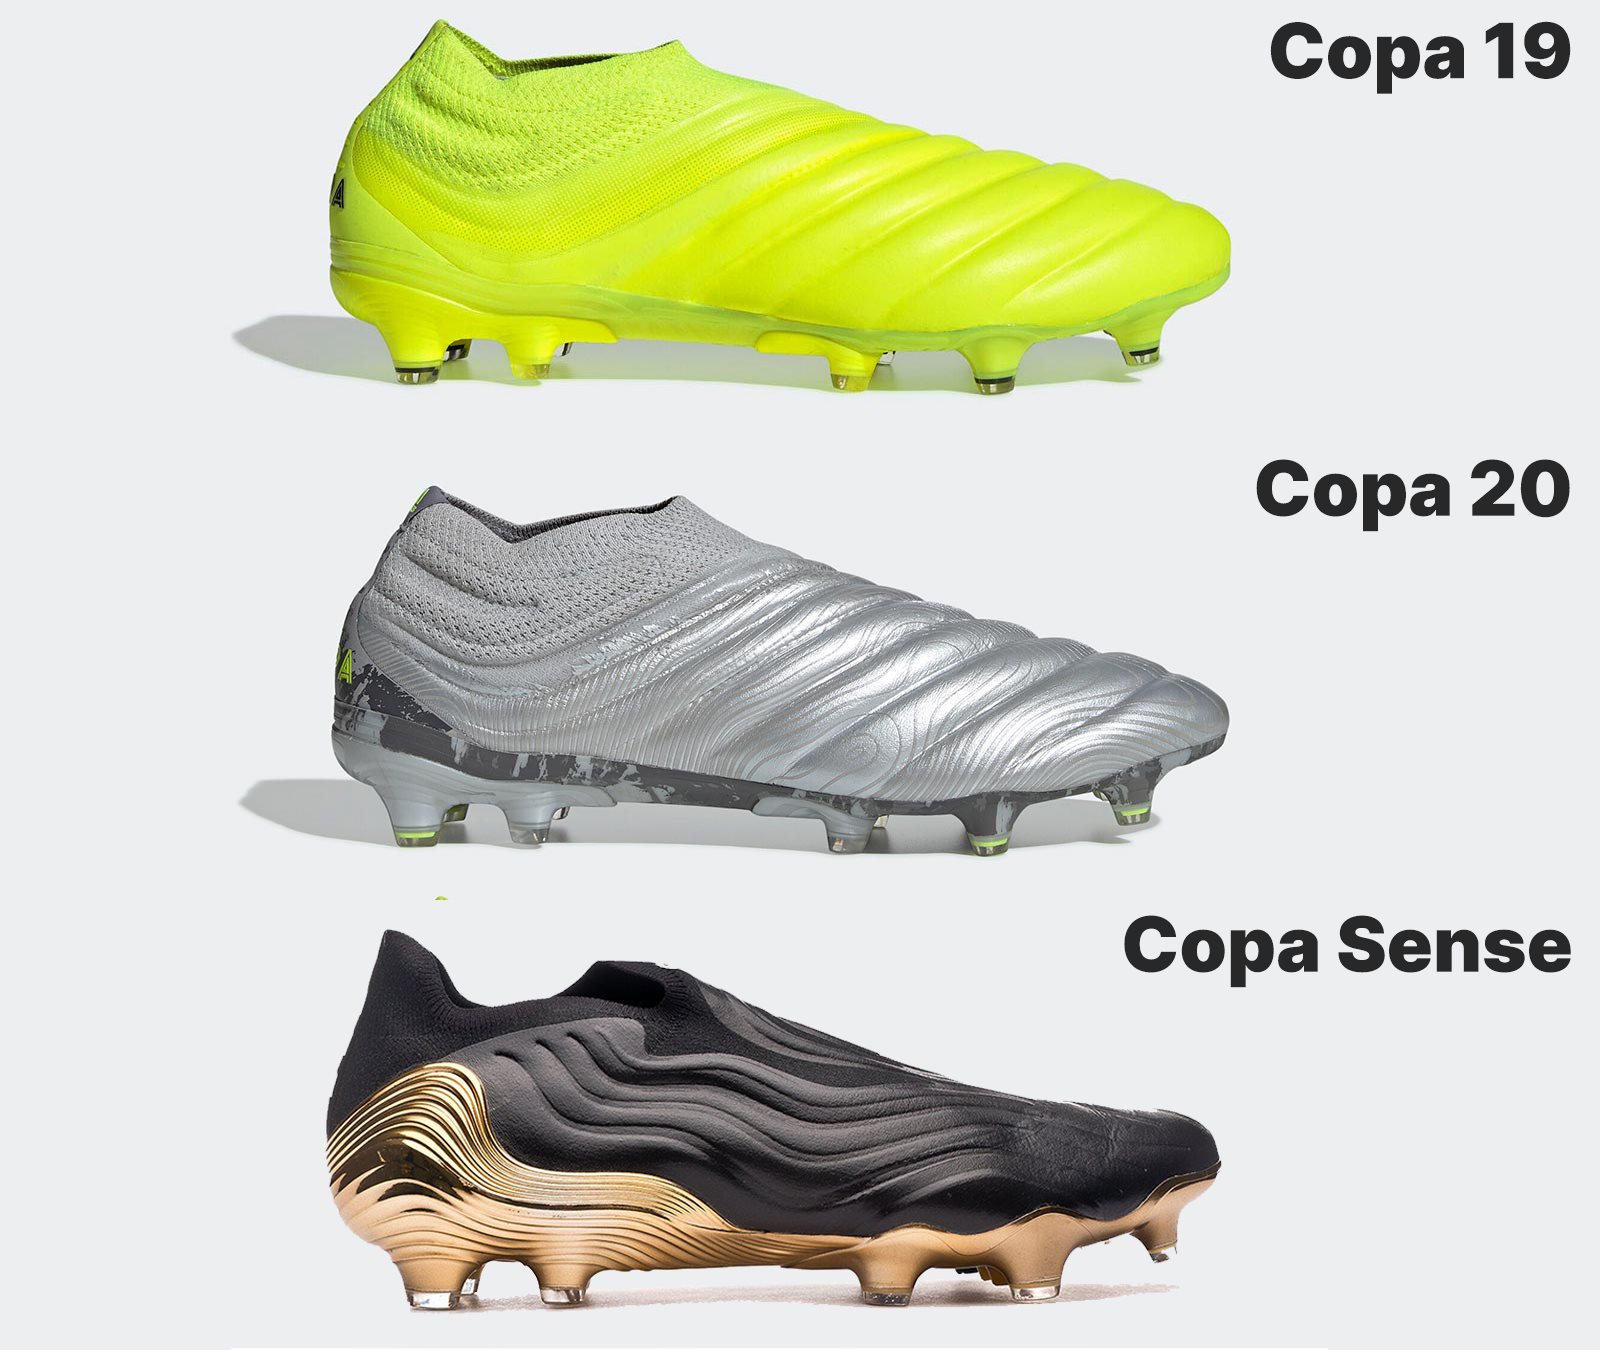 Exclusive: Adidas to Use No Kangaroo Leather For Adidas Copa 2023 Boots - Footy